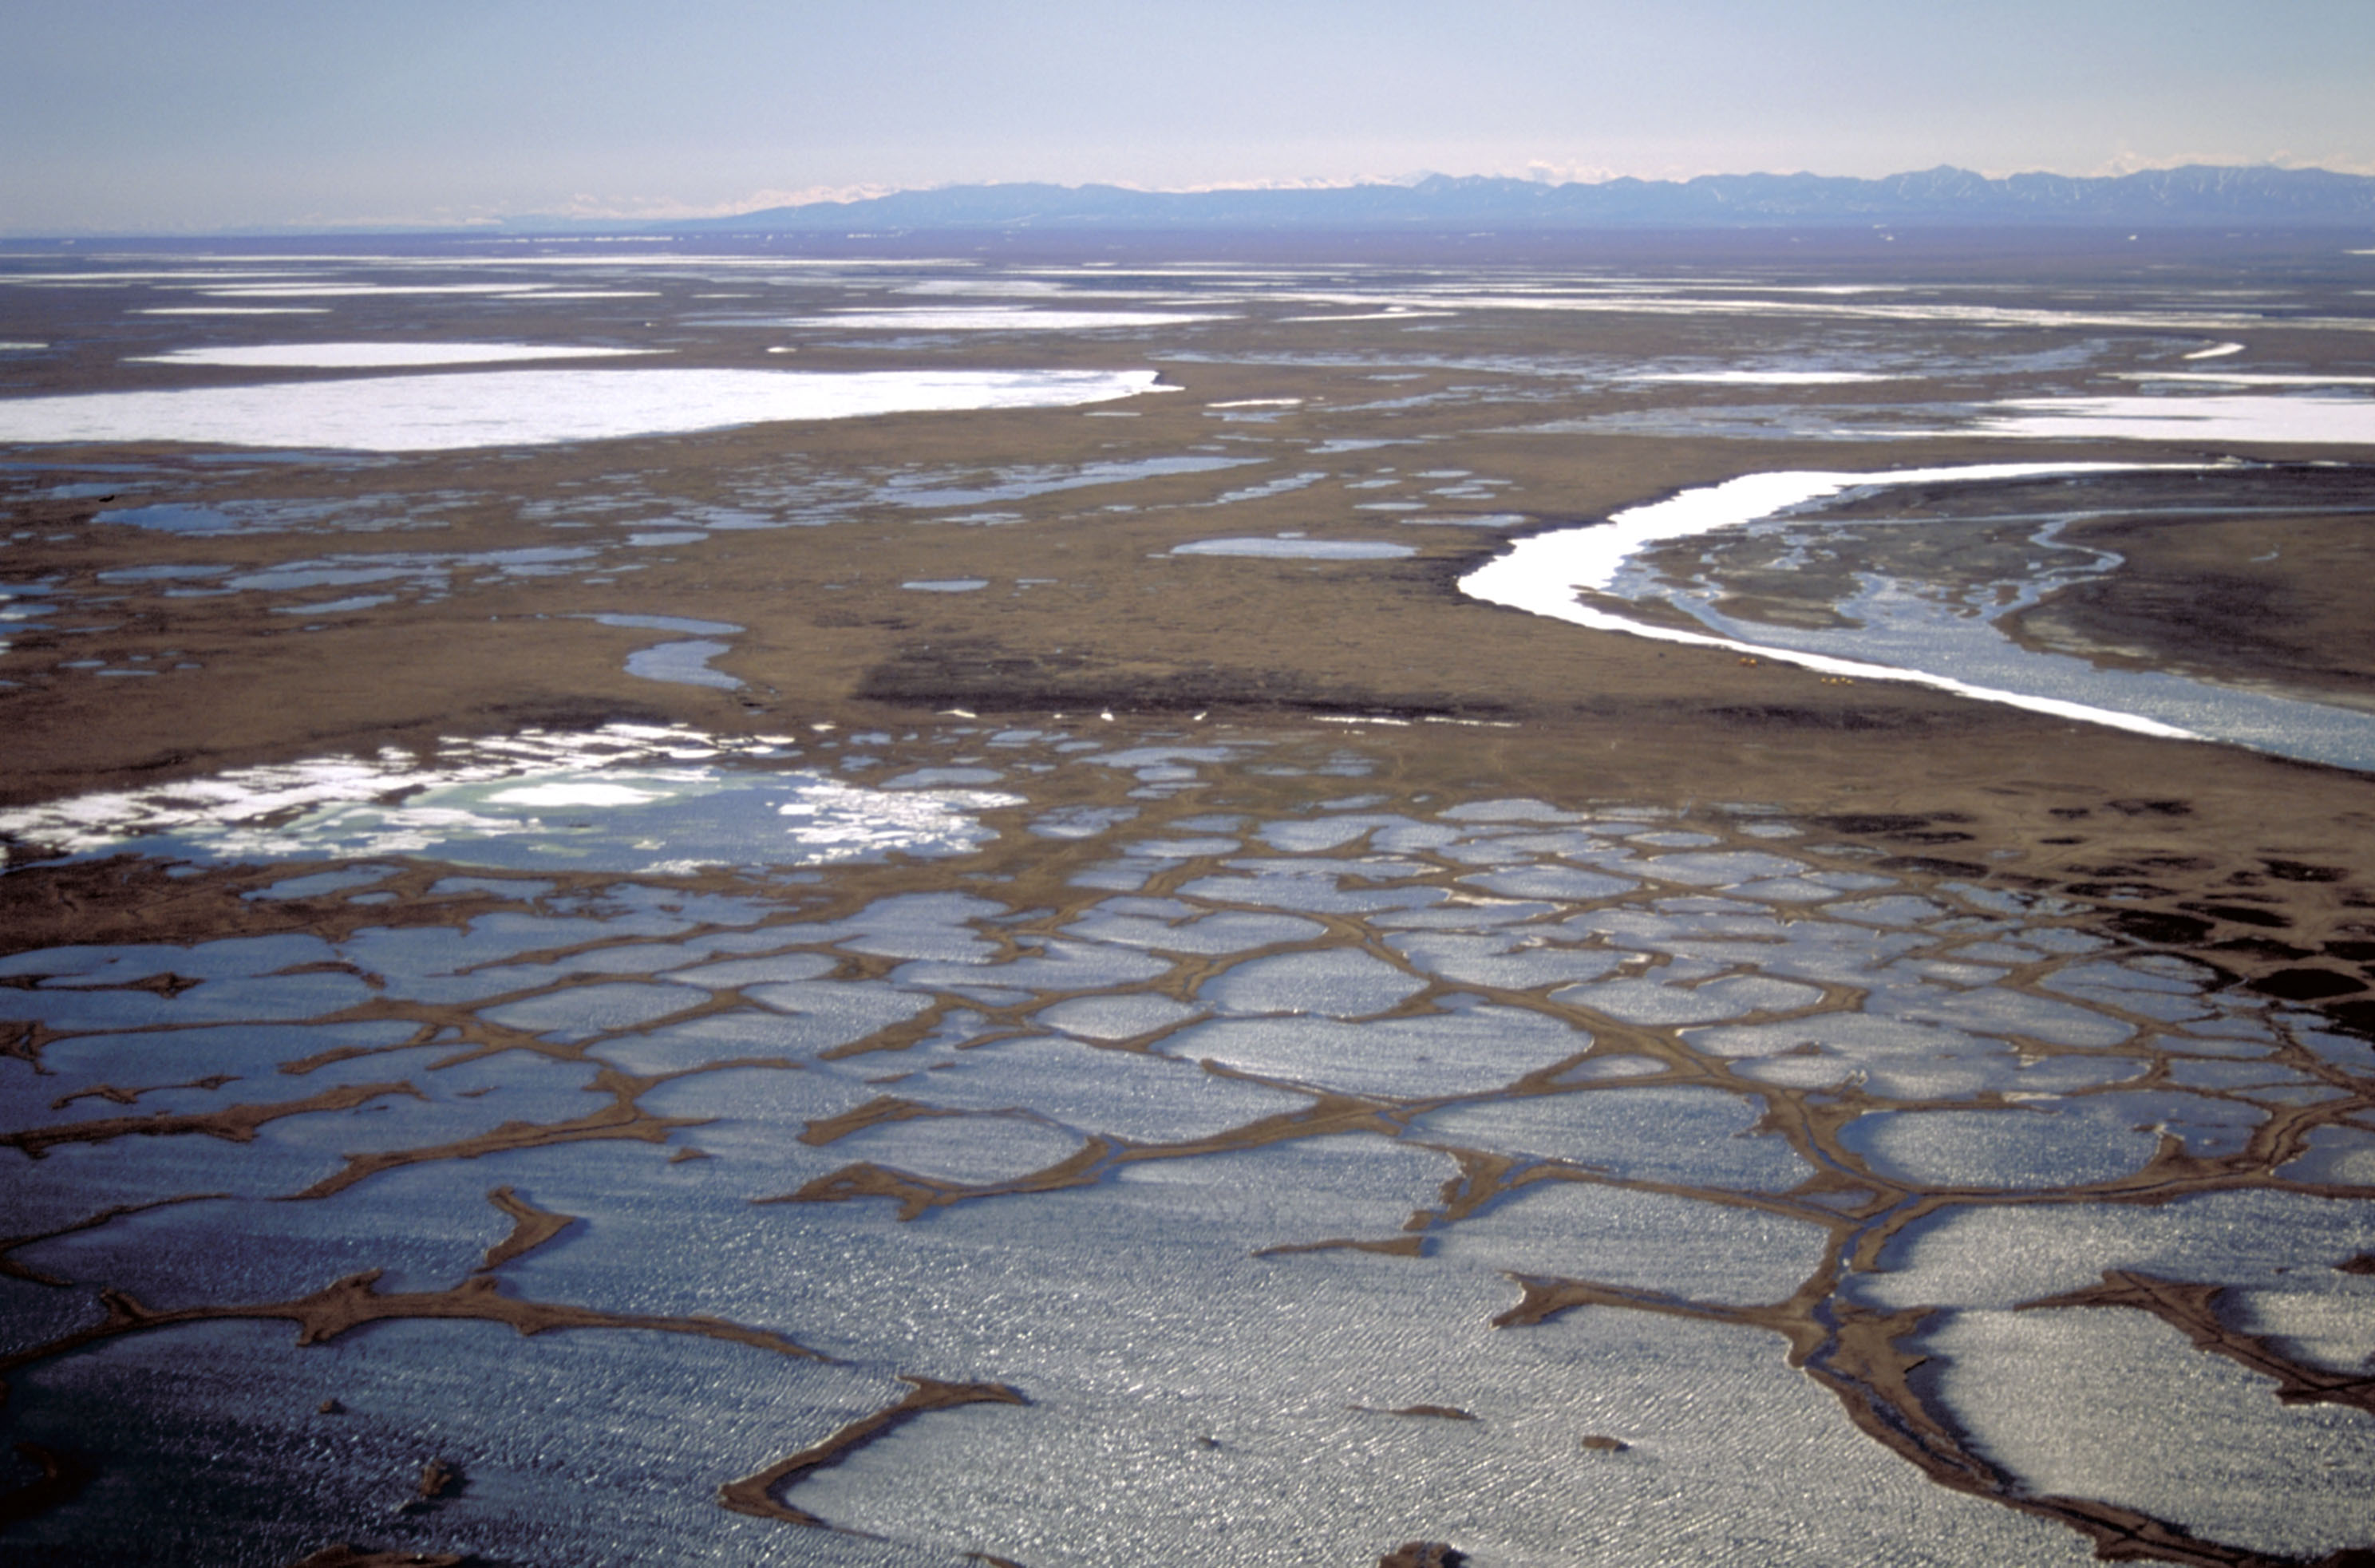 The coastal plain within the 1002 Area of the Arctic National Wildlife Refuge is seen in this undated handout photo provided by the U.S. Fish and Wildlife Service Alaska Image Library. REUTERS/HANDOUT/U.S. Fish and Wildlife Service